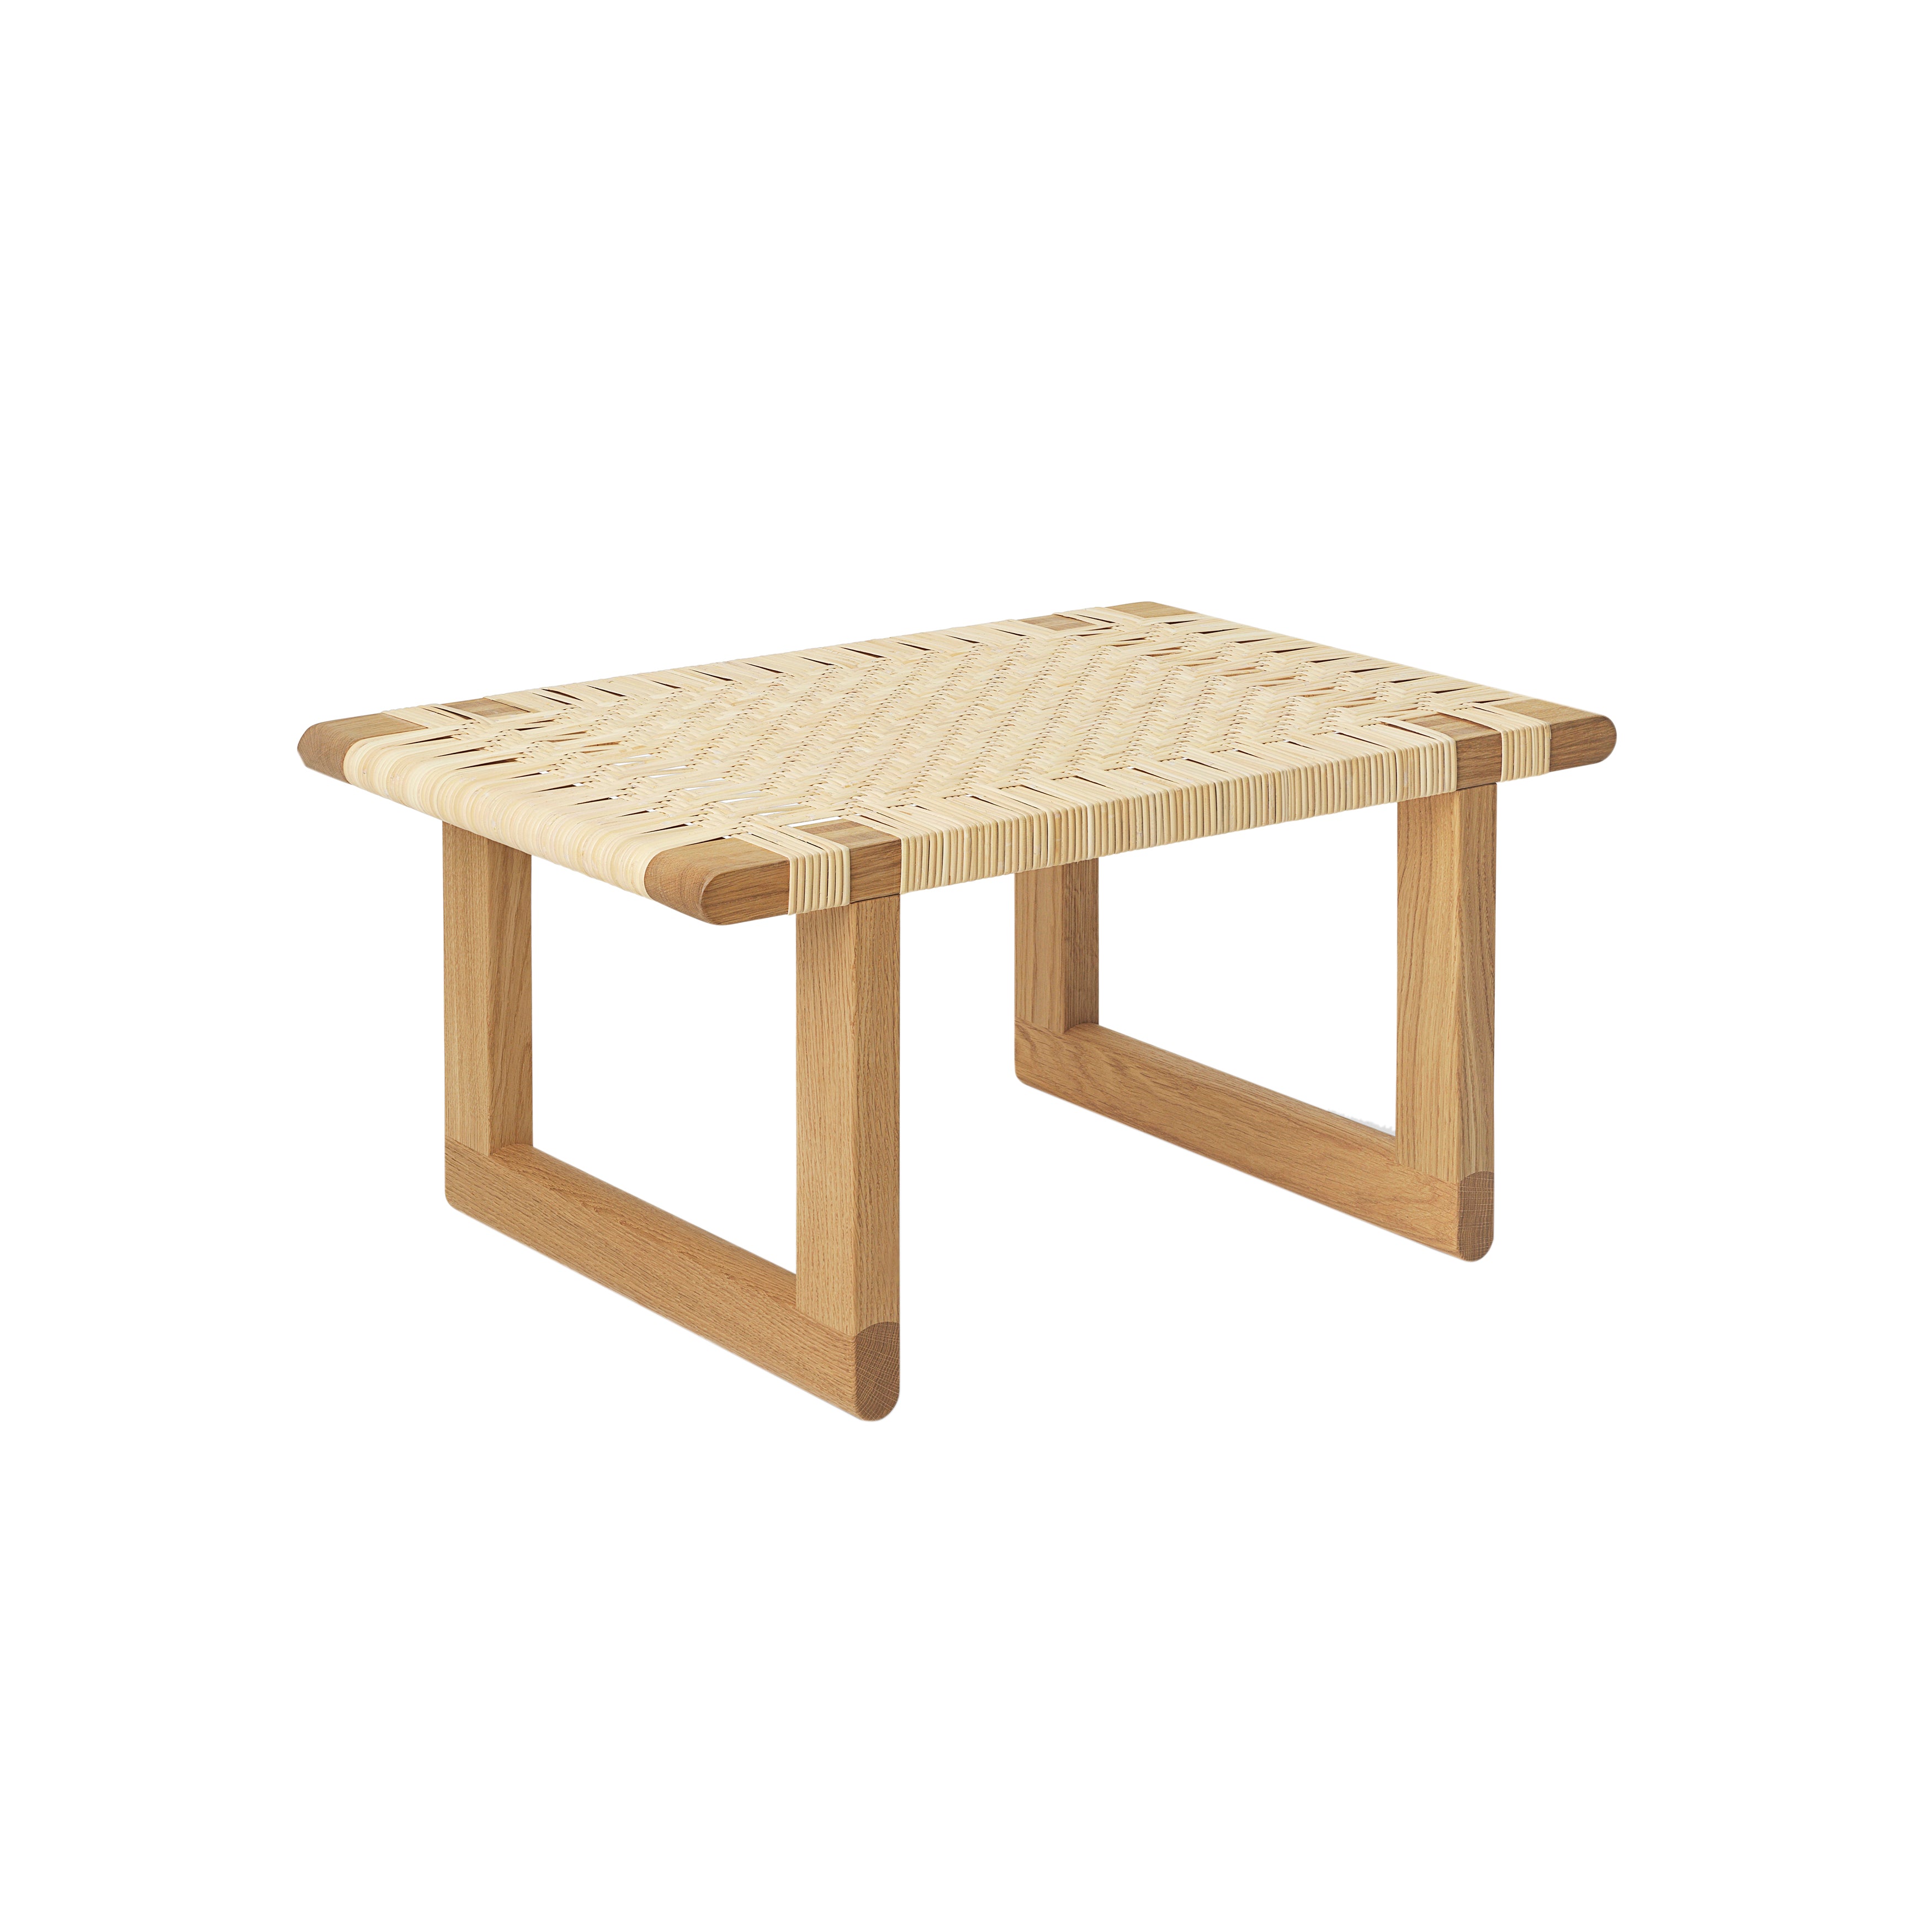 BM0488 Table Bench: Small - 27.2